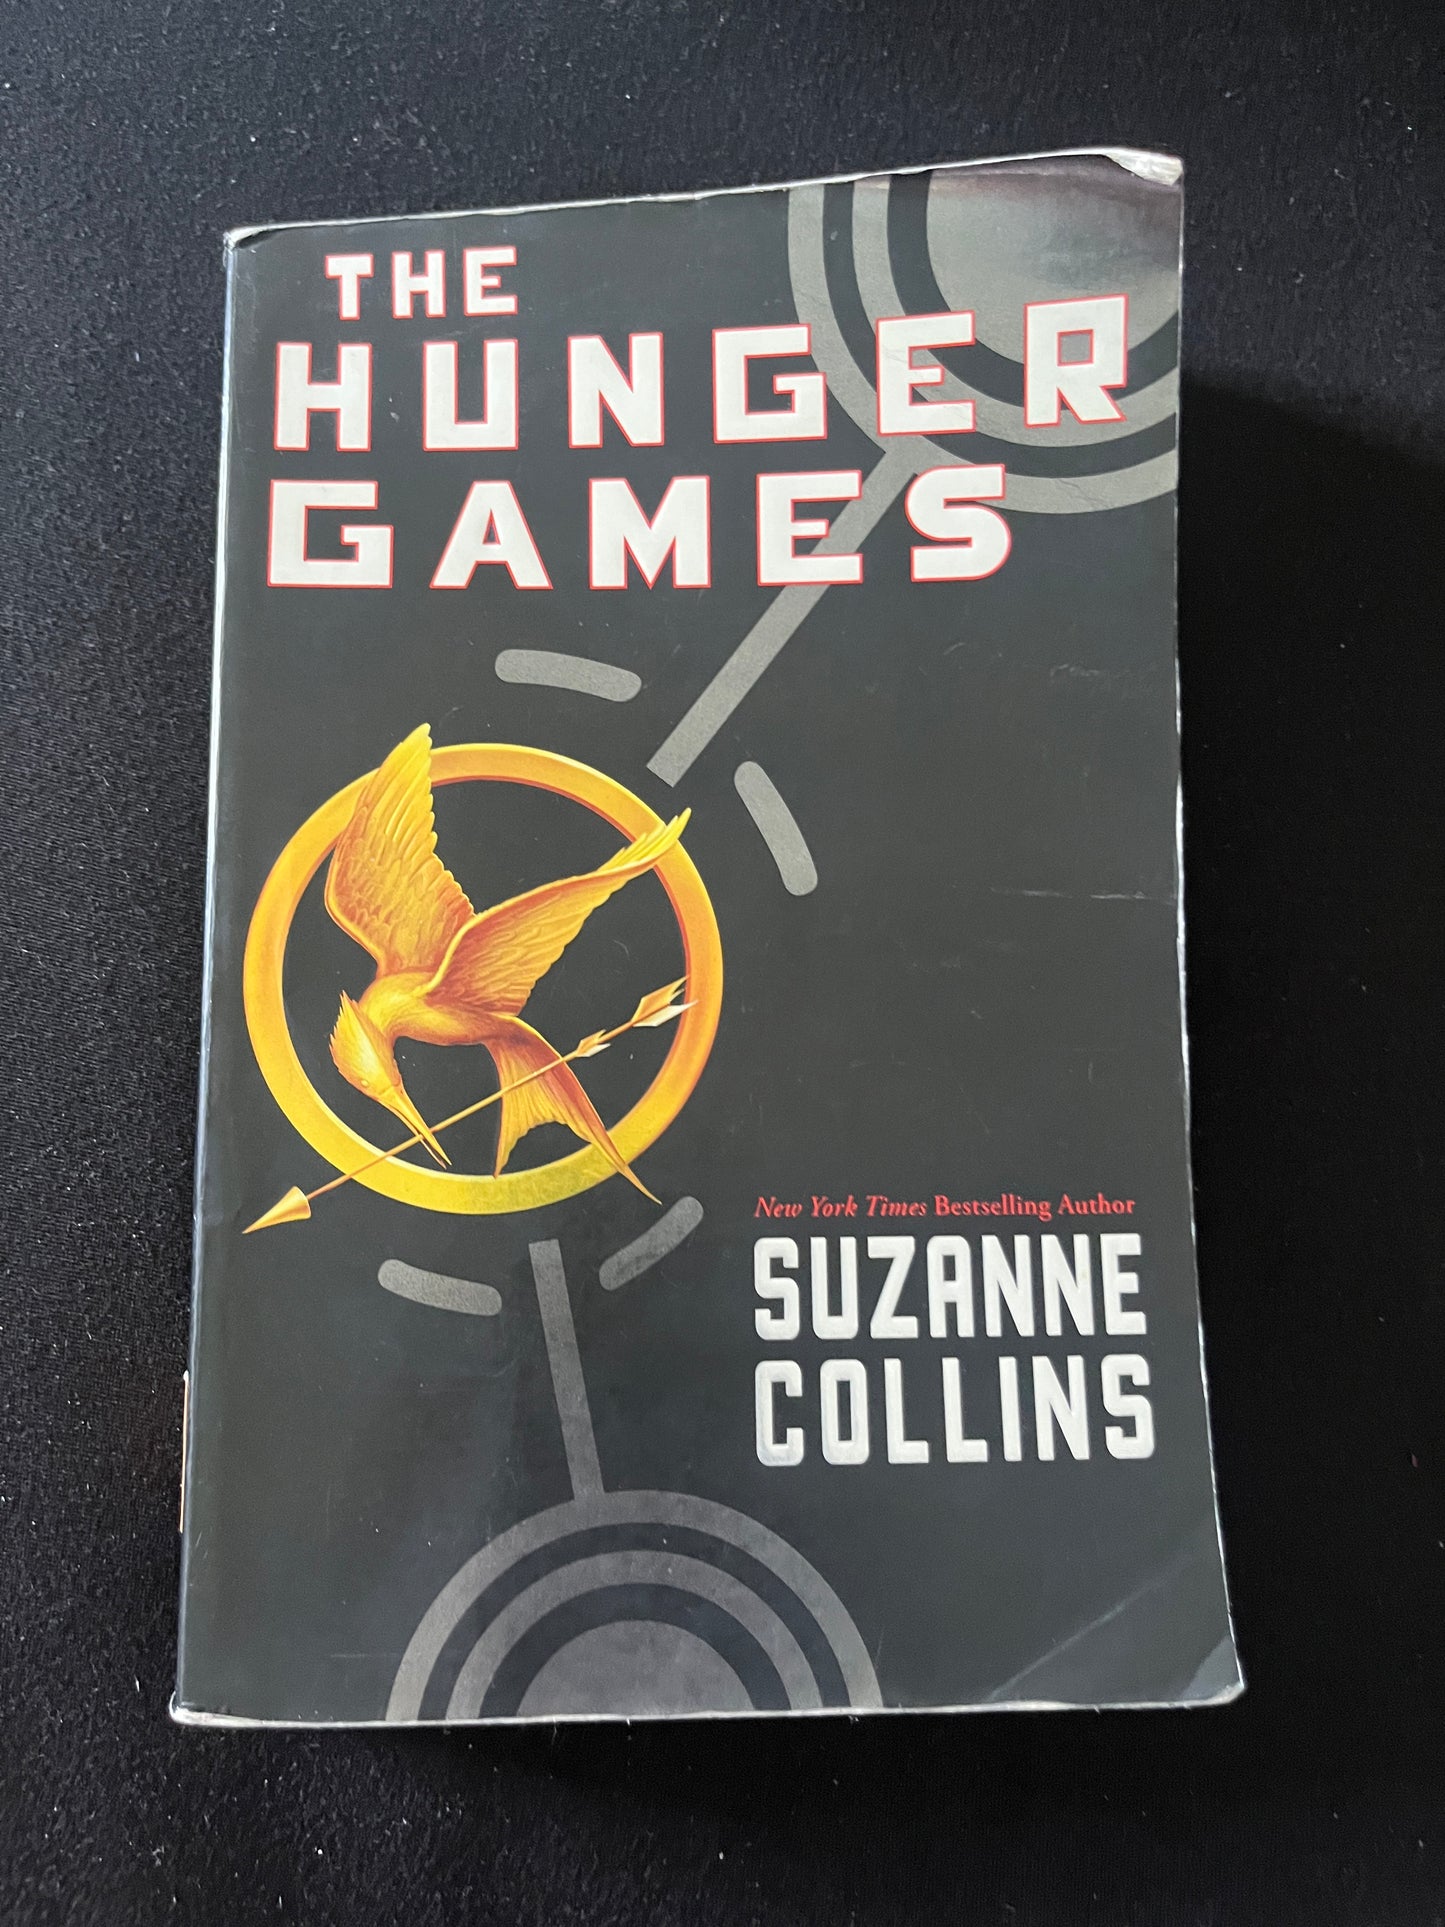 THE HUNGER GAMES by Suzanne Collins